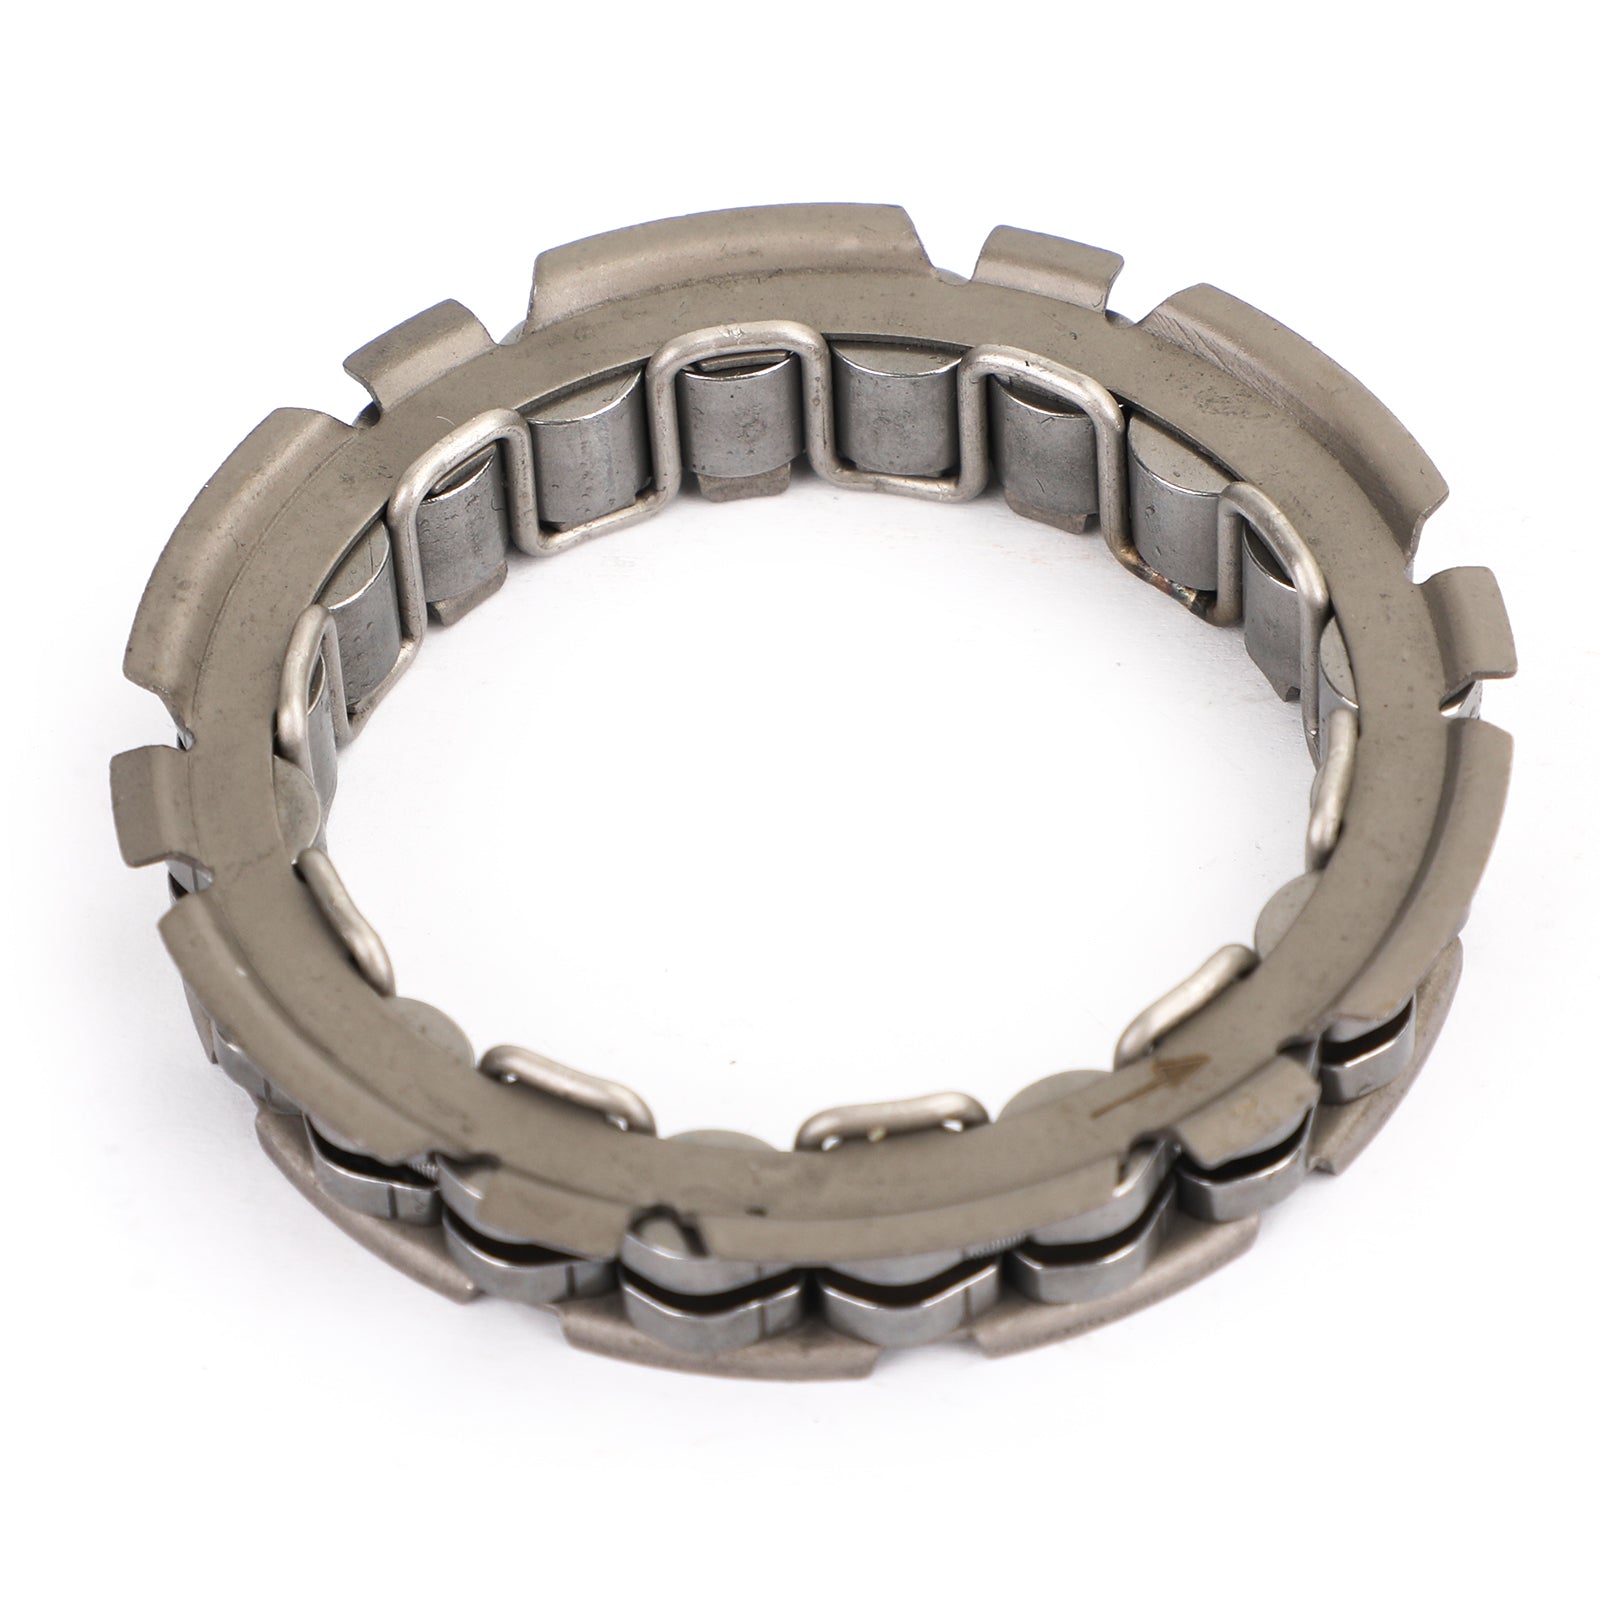 One Way Starter Clutch Bearing Fit for BMW F650 GS/CS F700GS F800GS/R/S/ST 99-16